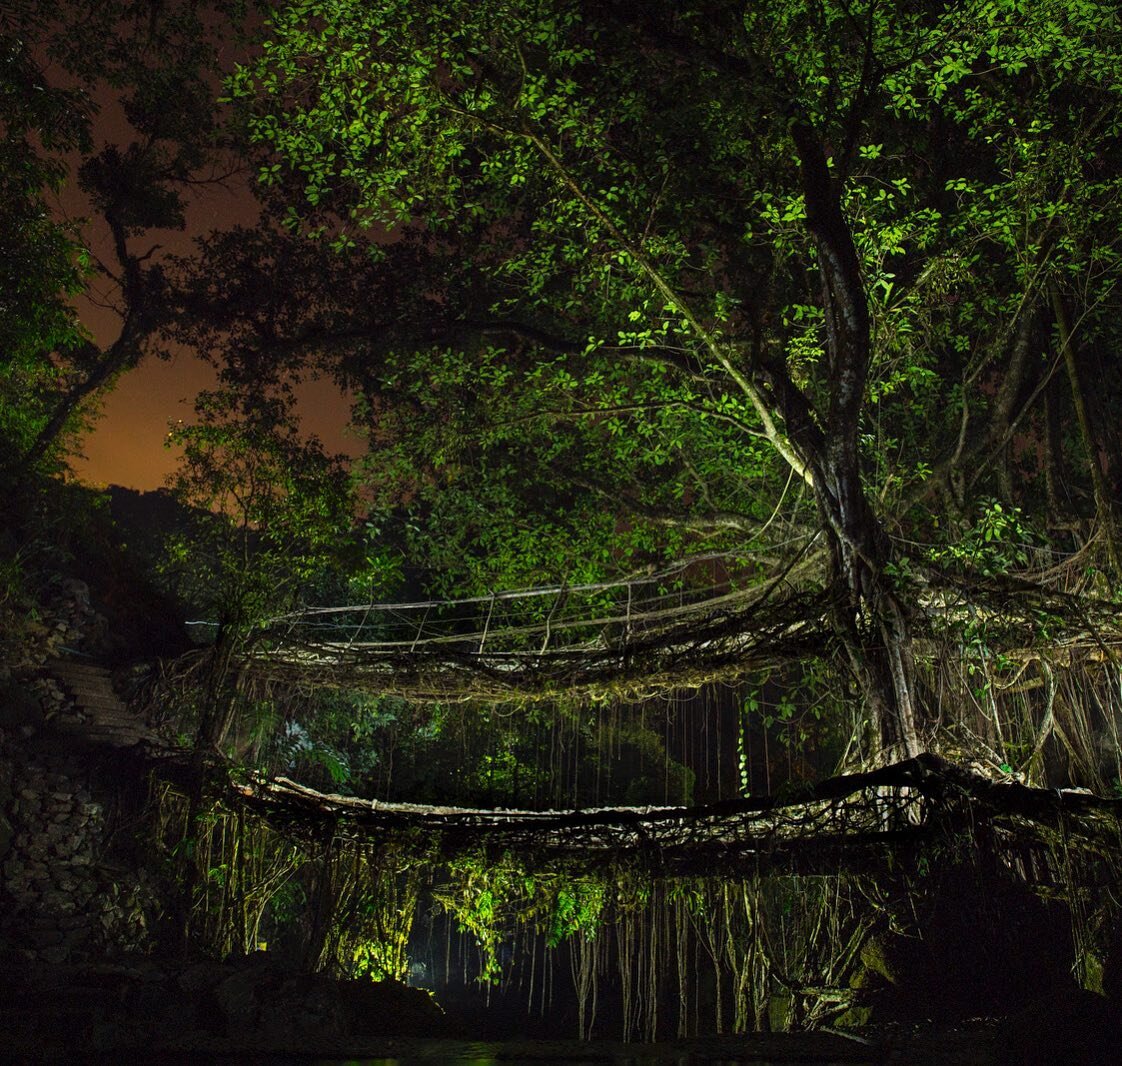 Root Bridges in @npr : It's a delight to see this full story published on @npr. This story was partially funded by NatgeoSociety and was published in NatGeo magazine in December 2019 issue which you probably saw. Here is the larger story for your eye